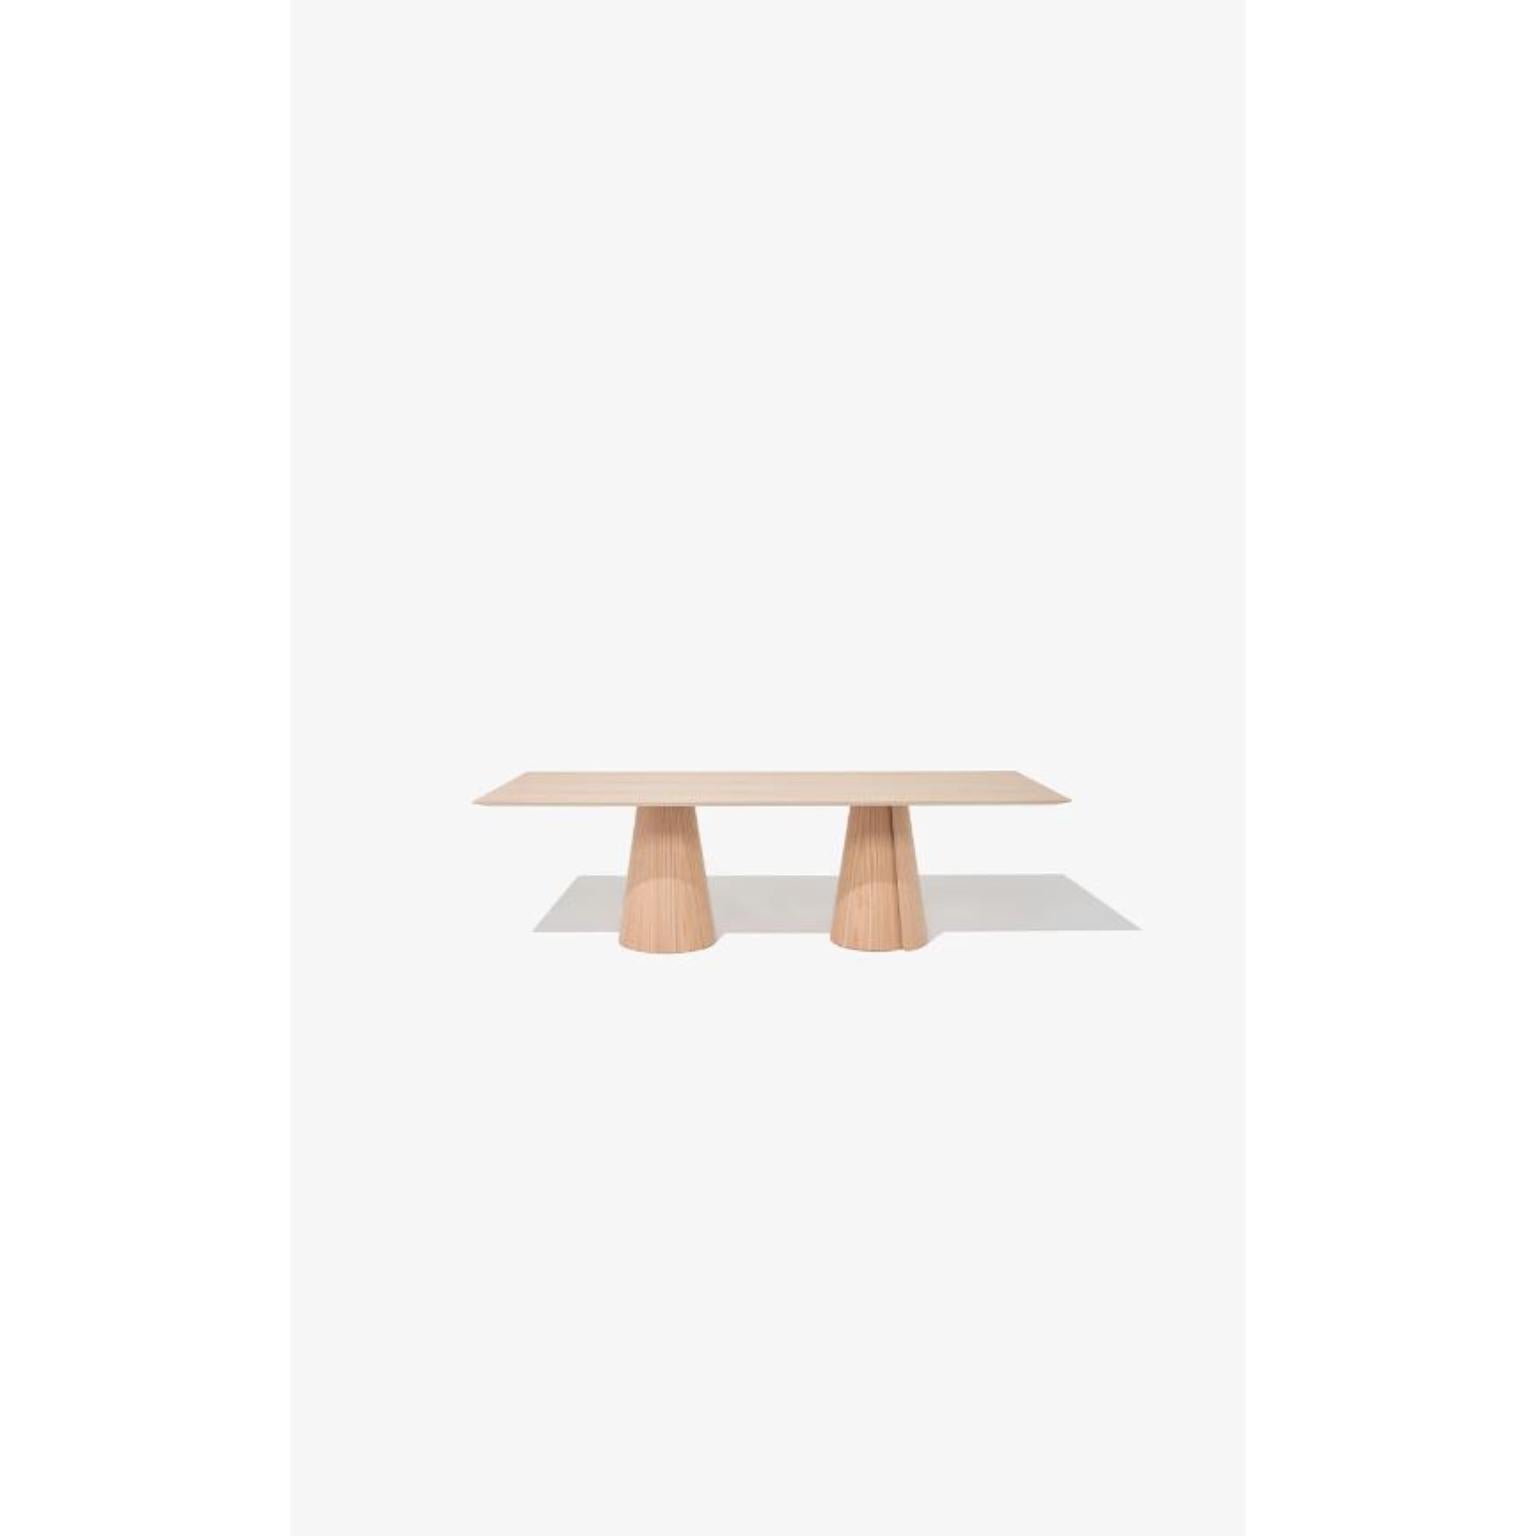 260 Volta Rectangular Dining Table by Wentz
Dimensions: D 110 x W 260 x H 75 cm
Materials: Wood, Plywood, MDF, Natural Wood Veneer, Steel.
Also available in different colors: Oak, Walnut, Black, White, Leaf Green.

The Volta table references nature